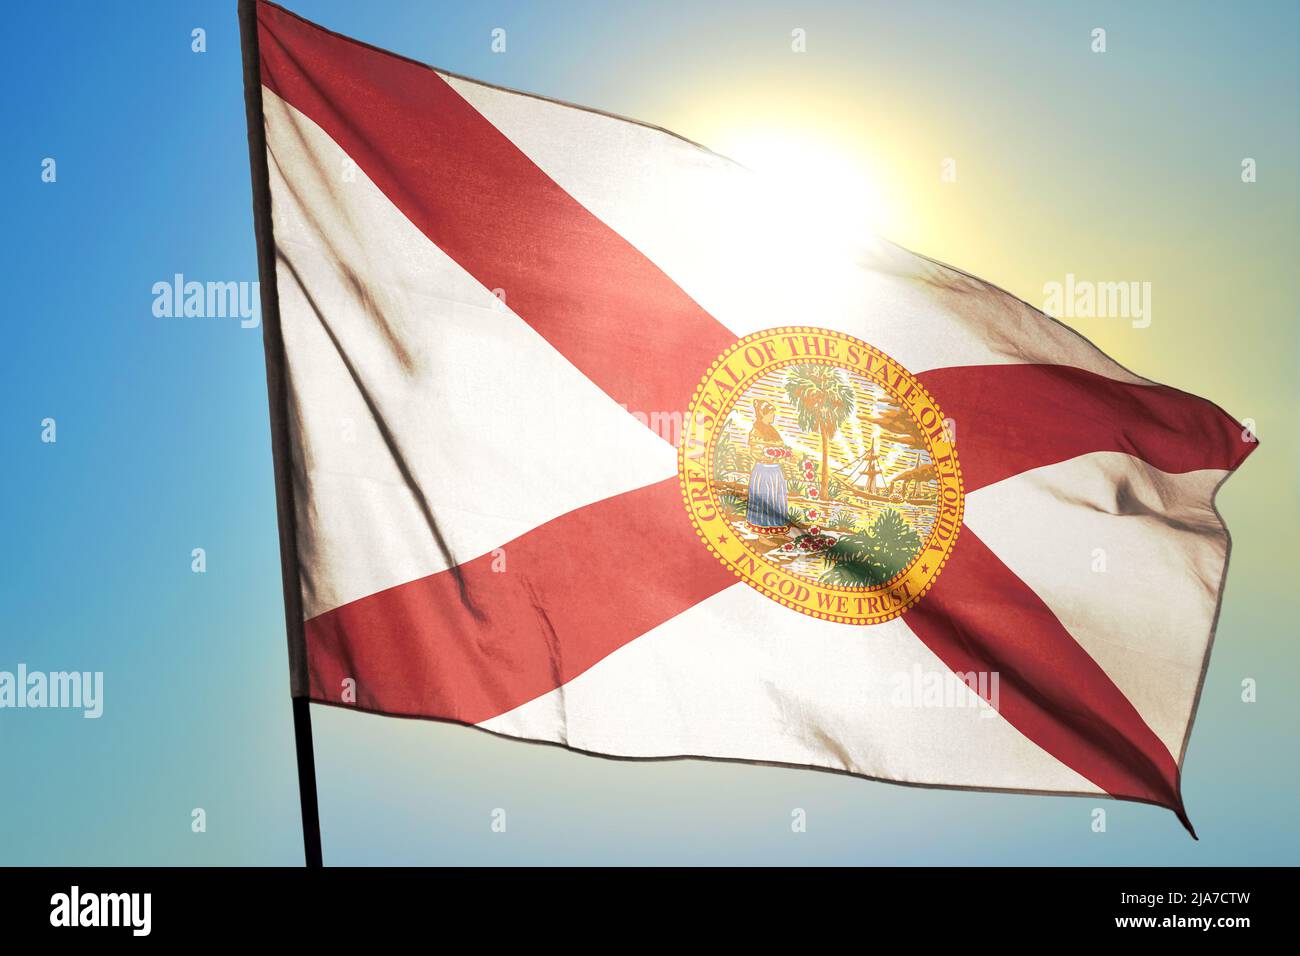 Florida state of United States flag waving on the wind Stock Photo